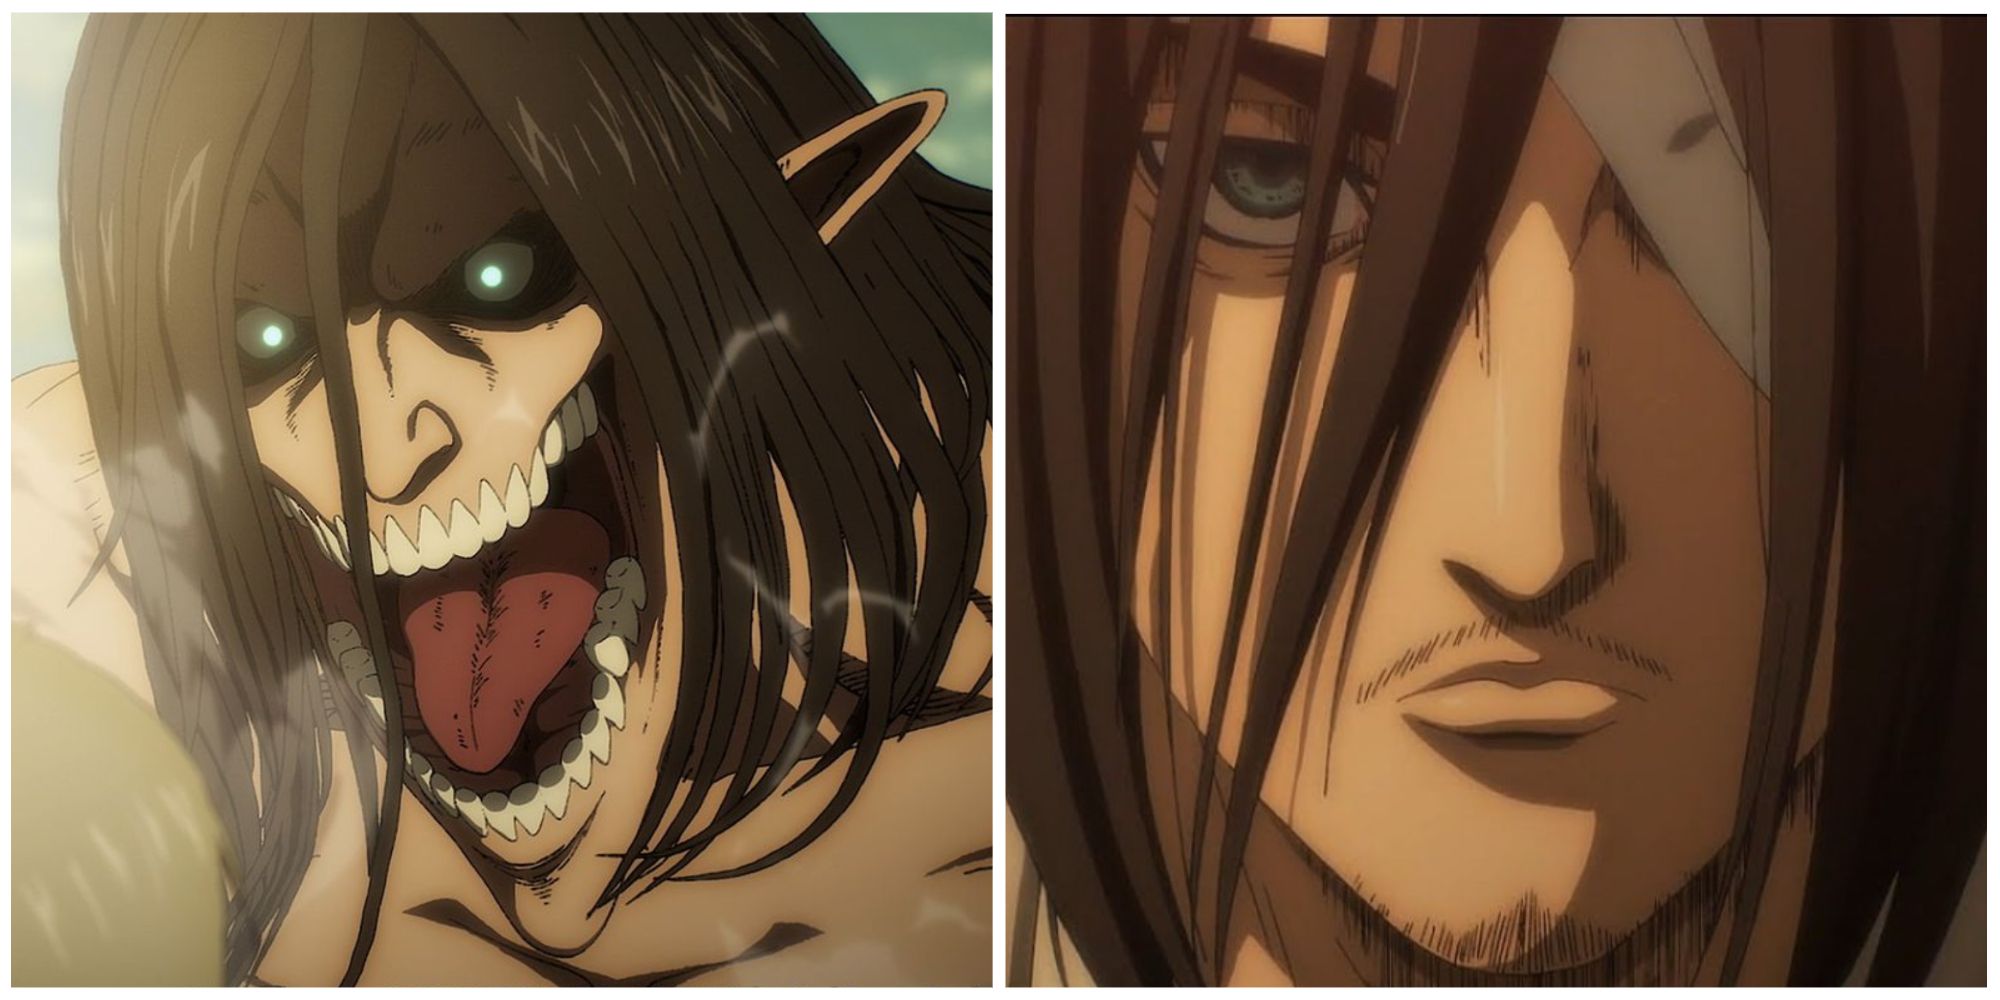 Attack On Titan: 12 Most Evil Acts Eren Jaeger Has Done, Ranked